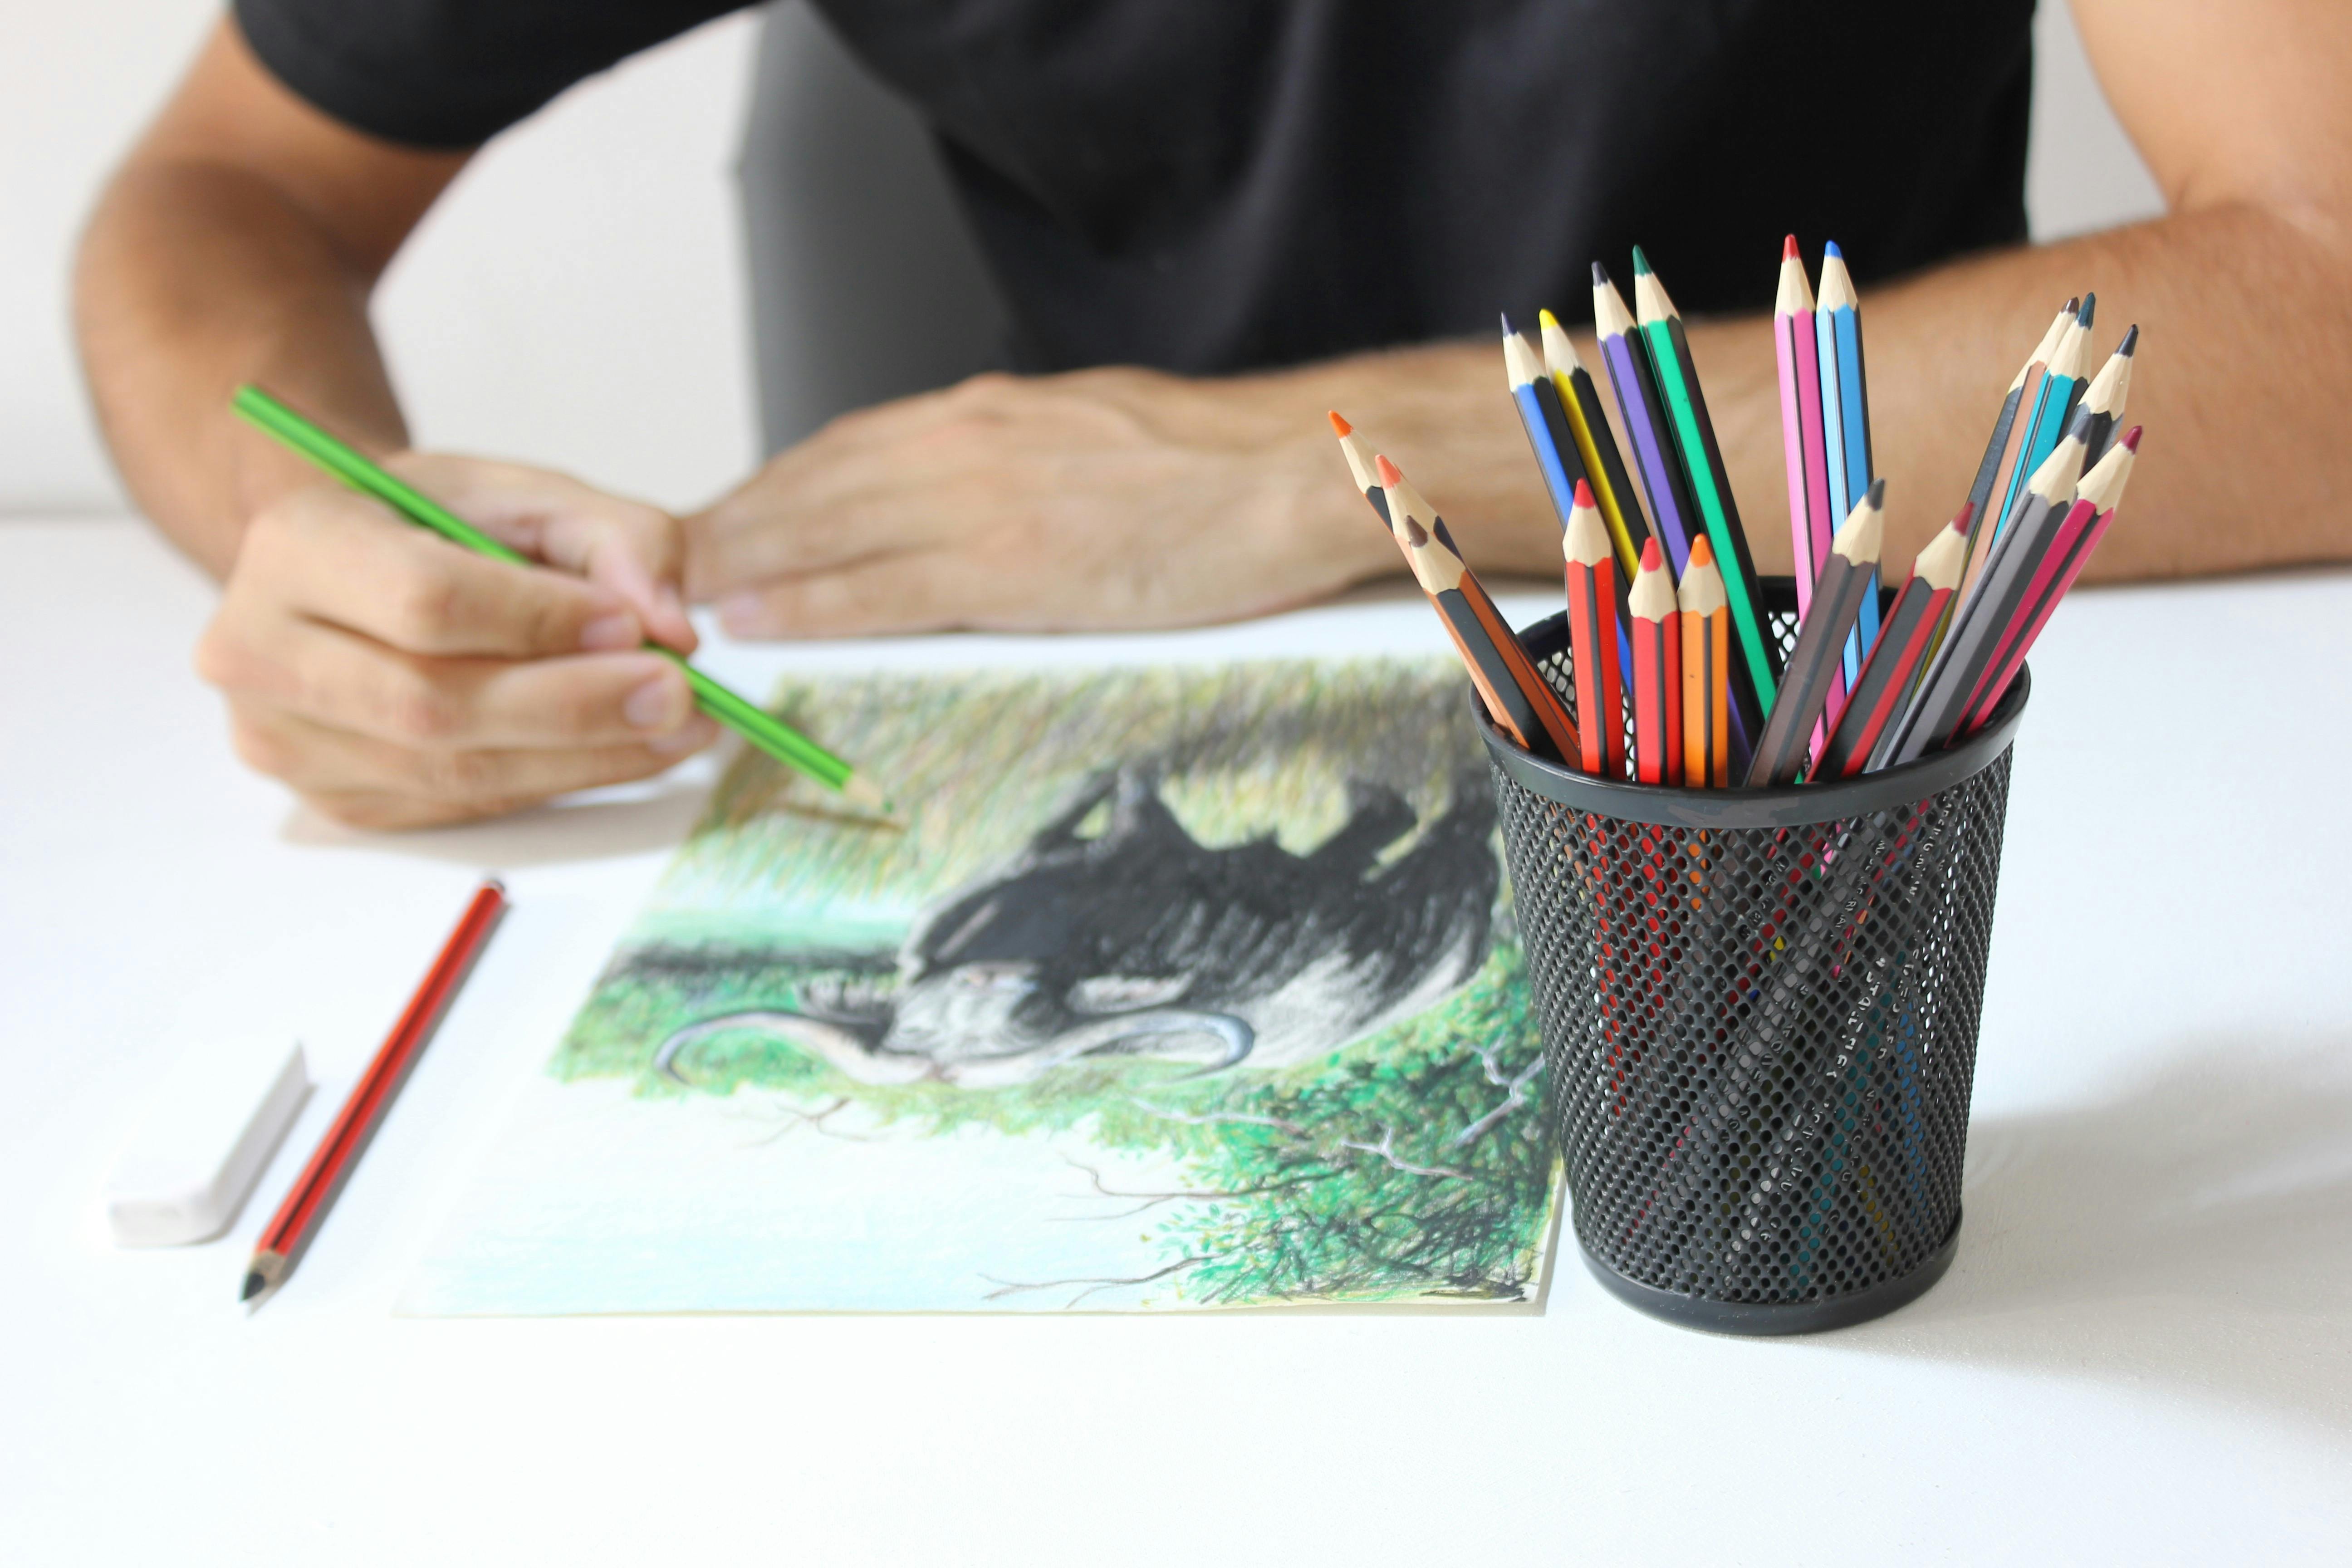 The Best Paper for Colored Pencils - Our Top Choices